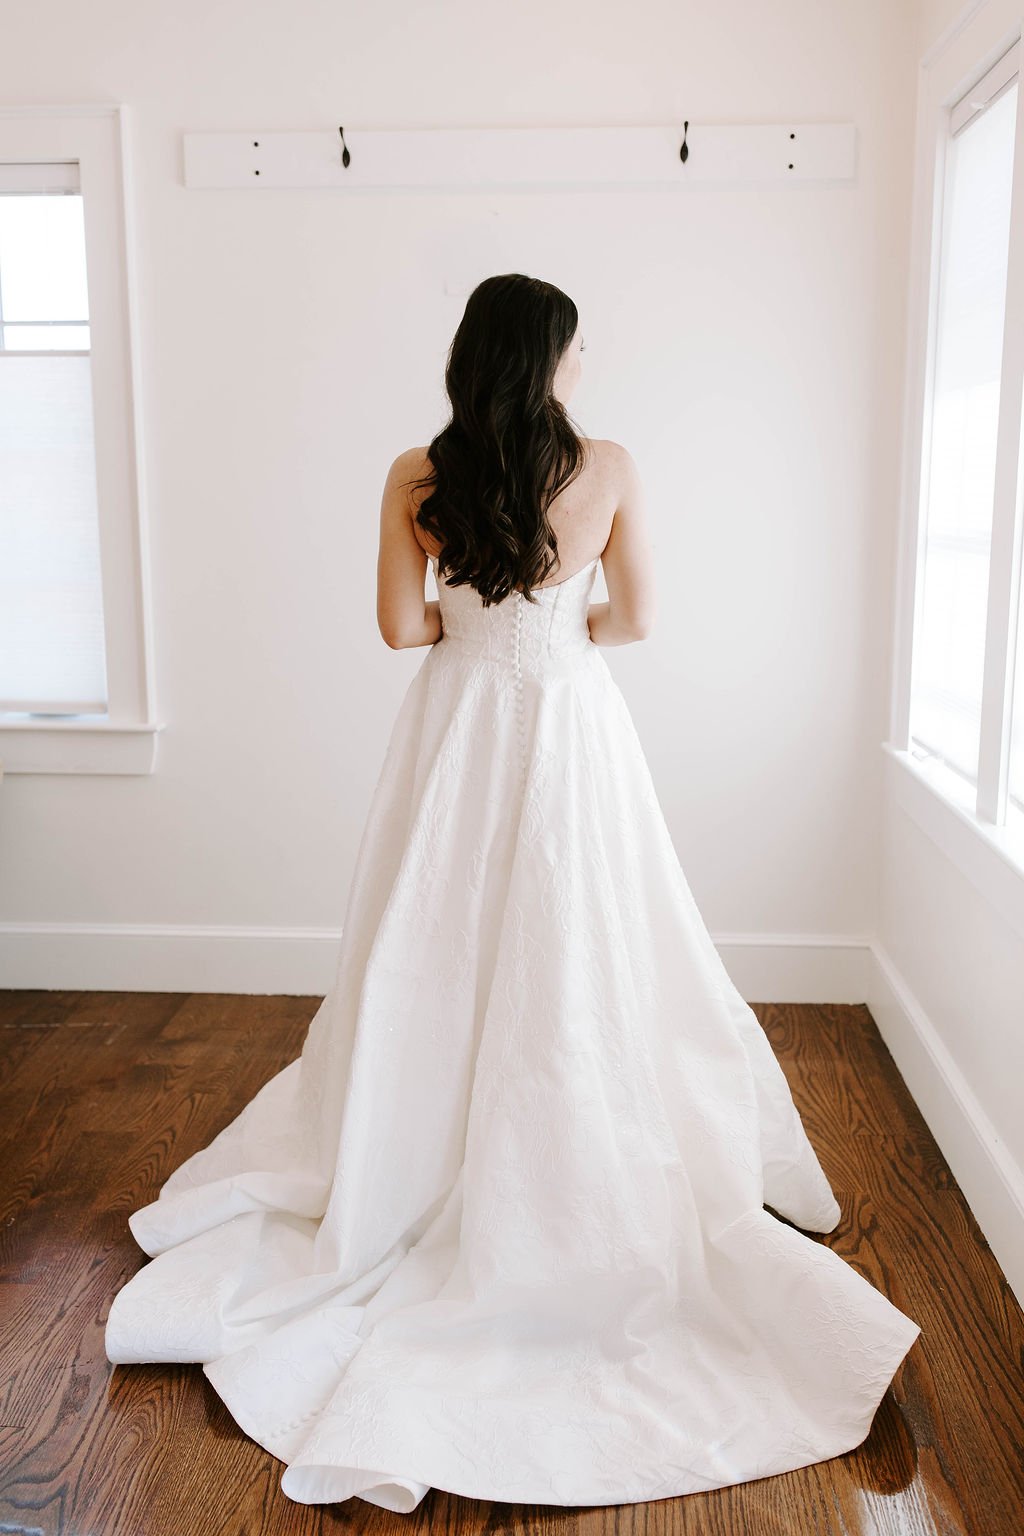 Bride facing wall in a ball gown wedding dress